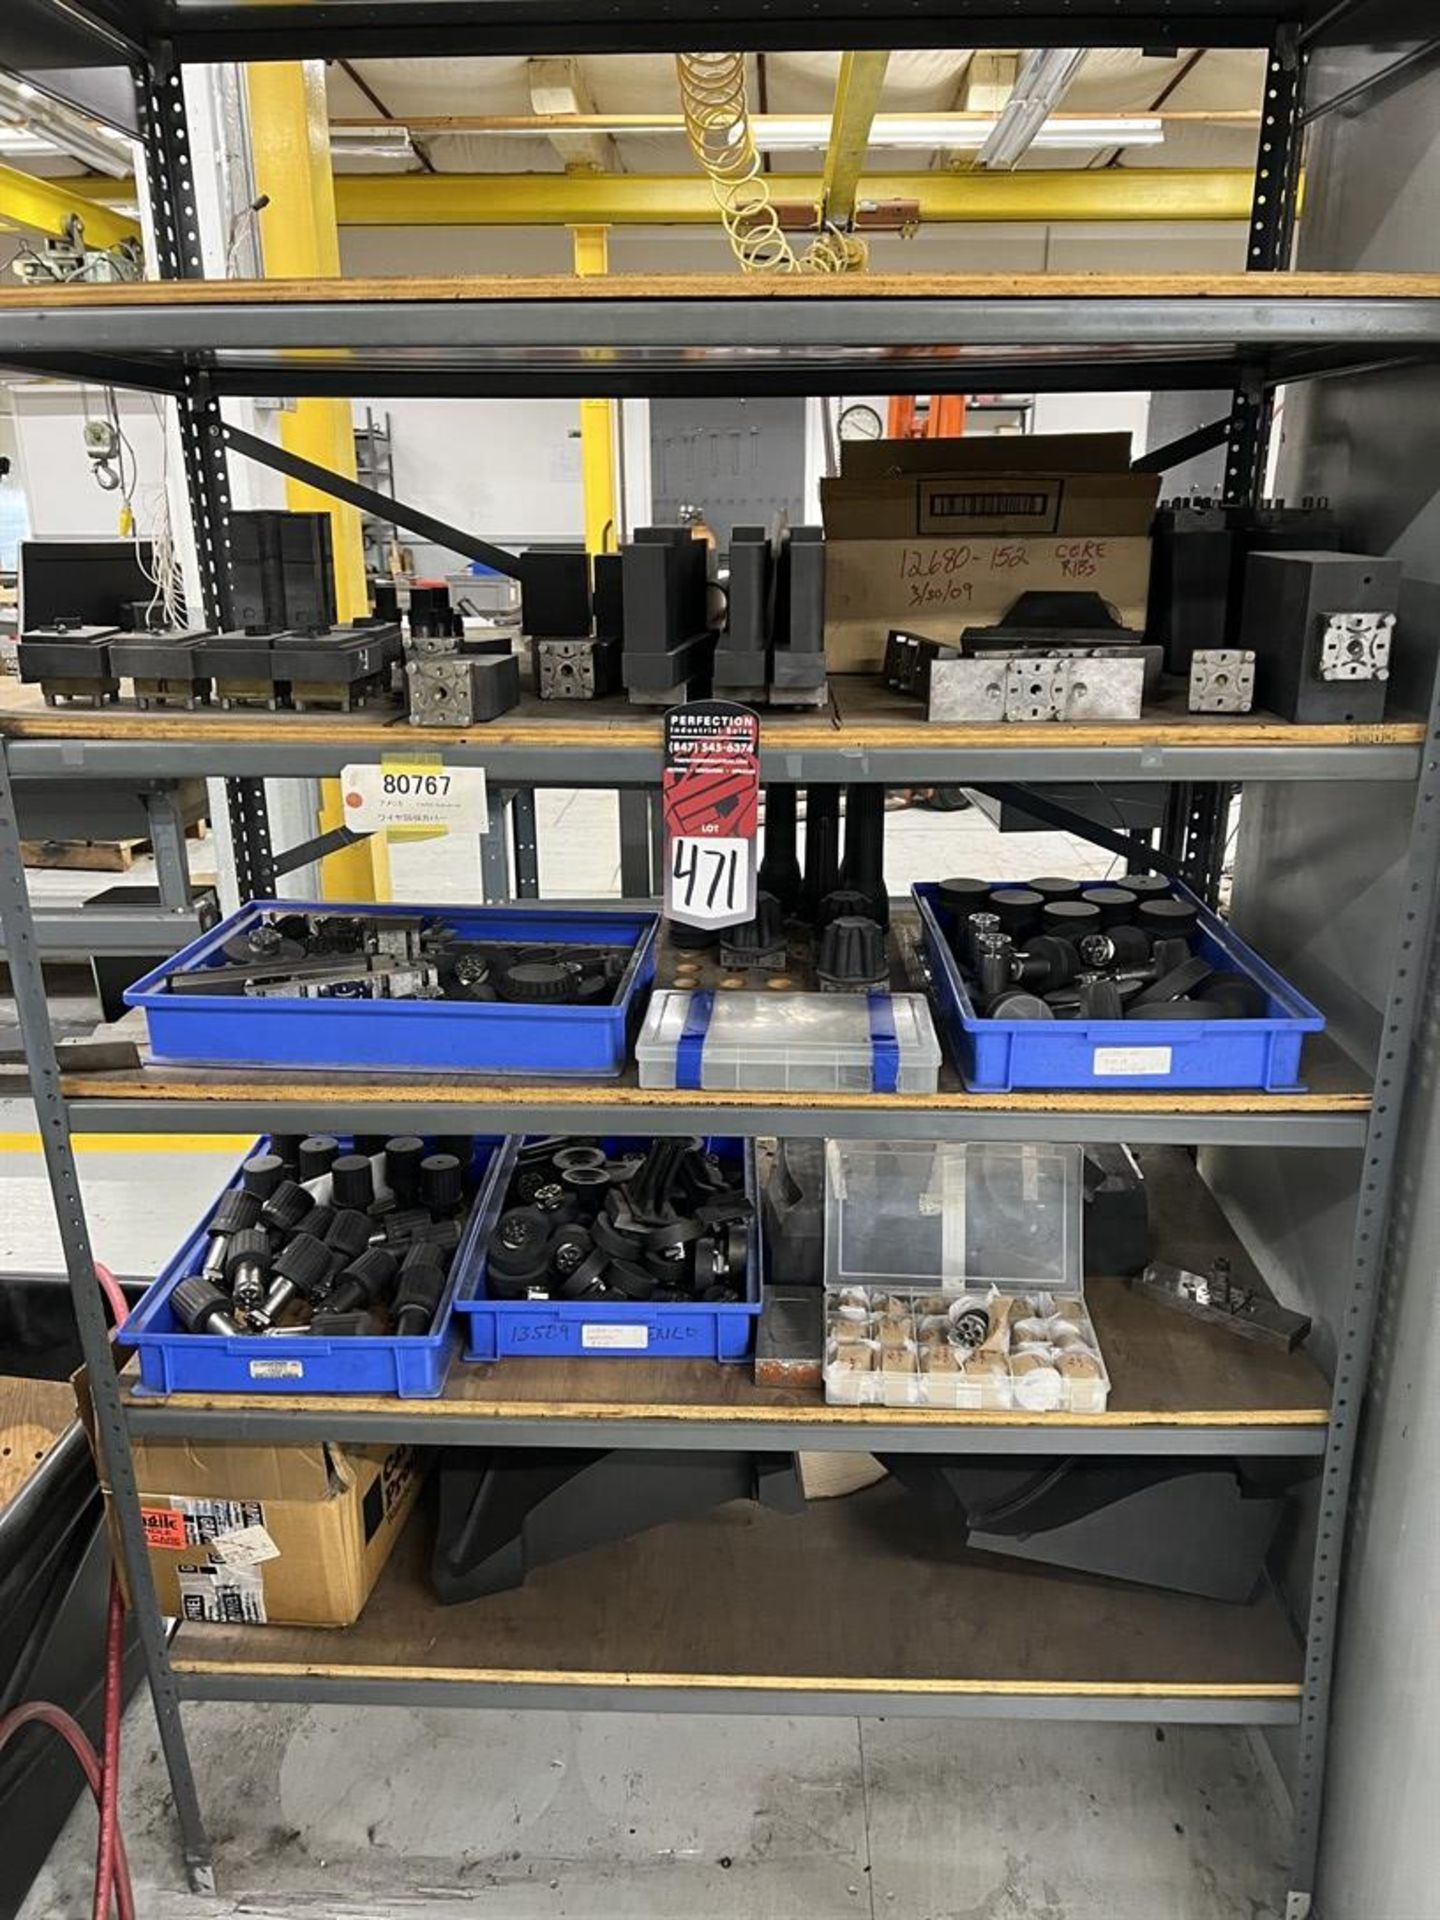 Rack of Assorted EROWA EDM Tooling, Fixtures, and Electrodes